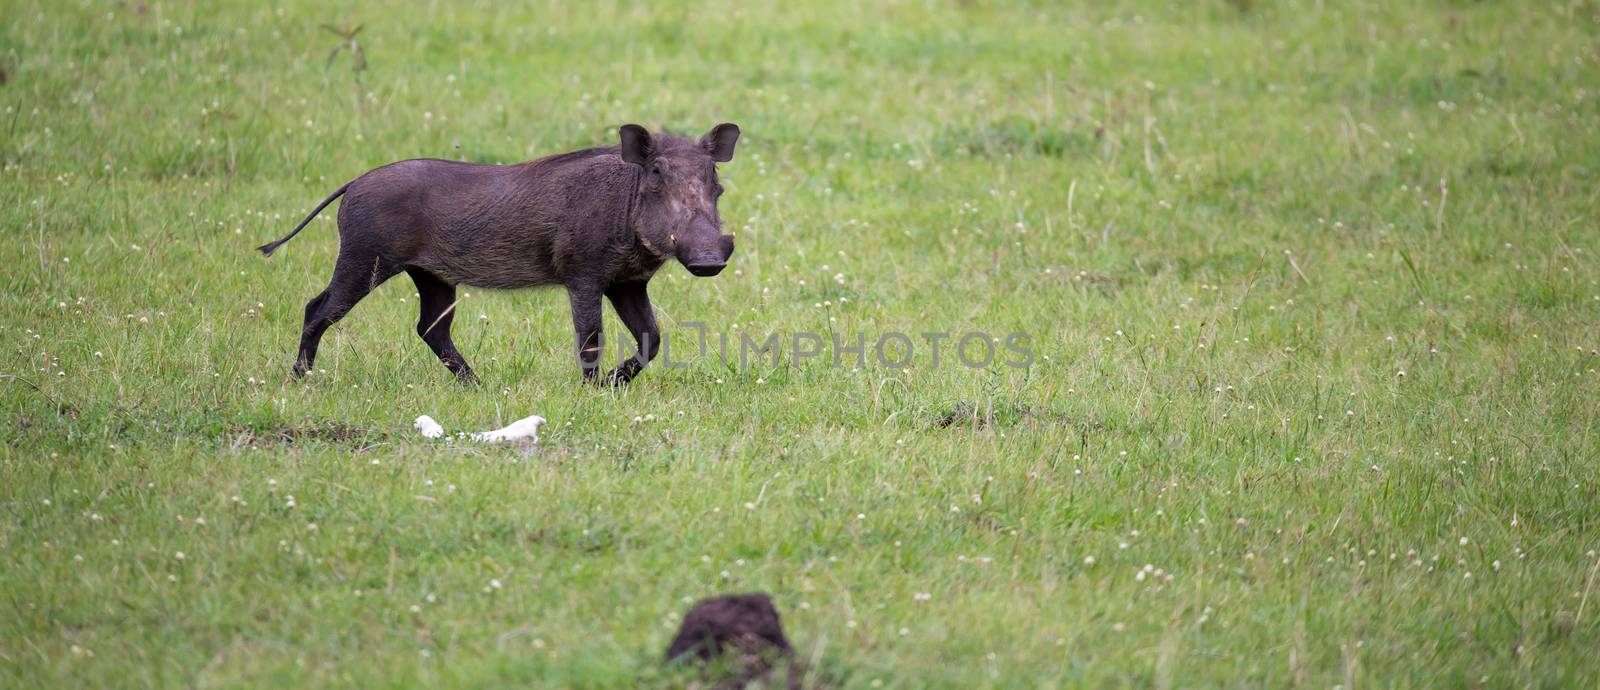 Warthogs are grazing in the savannah of Kenya by 25ehaag6